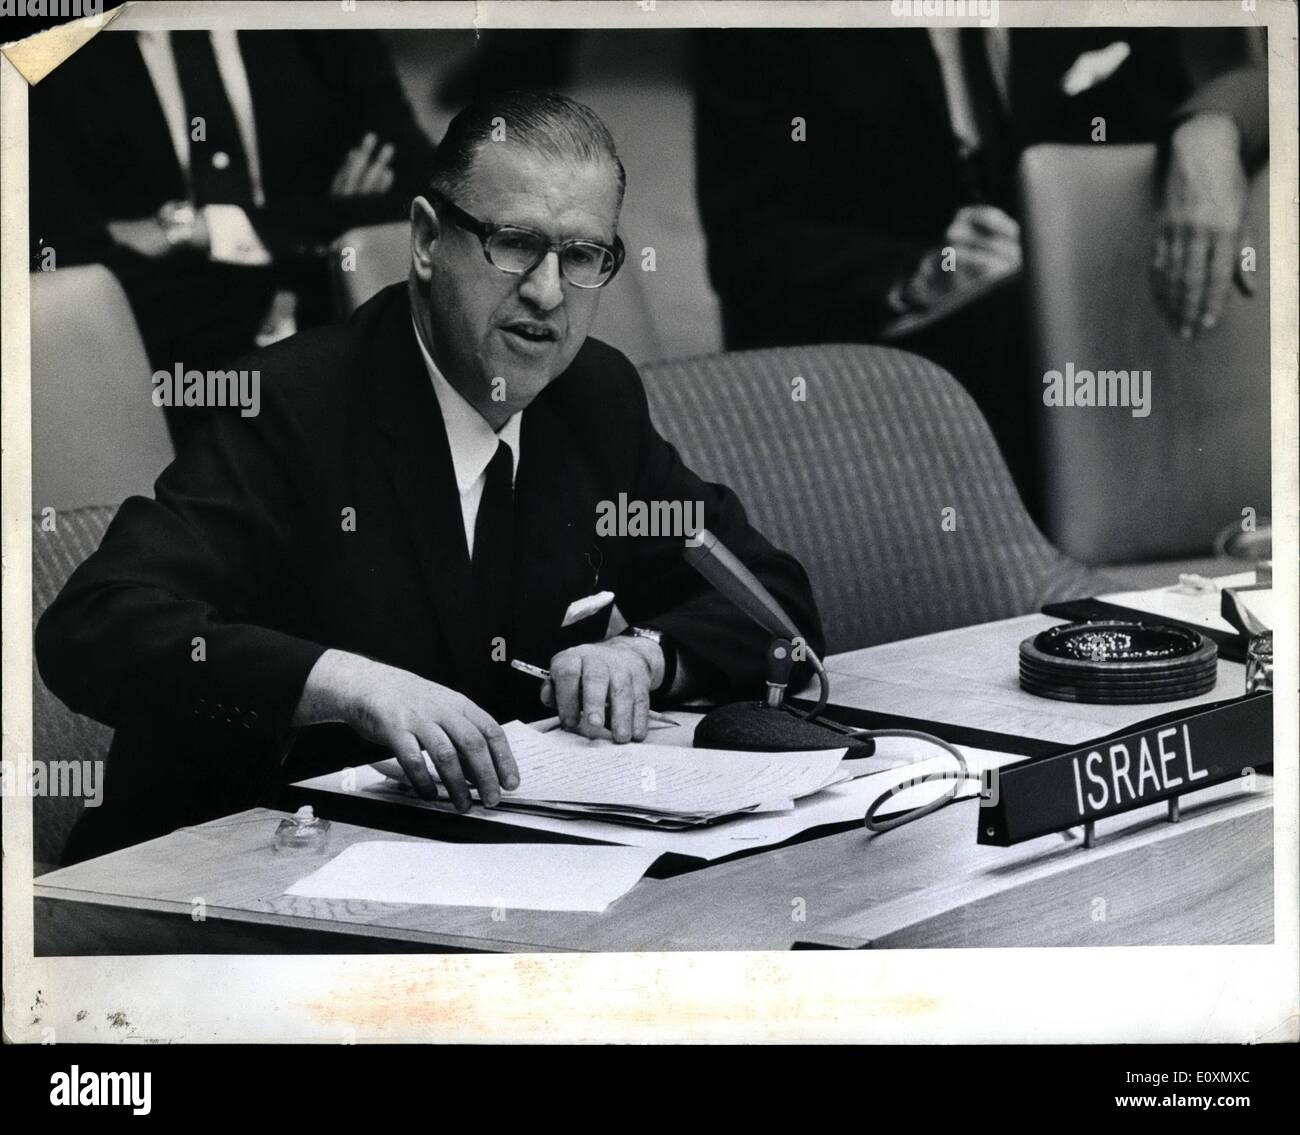 Jun. 06, 1967 - The Security Council tonight unanimously called upon the Governments concerned in the present hostilities in the middle East , ''as a first step, to take forthwith all measures for an immediate  and for a cessation of all military activities in the area''. The Secretary General was asked to keep the councol promptly and currently informed on the situation''. The draft resolution adopted tonight was put forward at the start of the meeting by the President of the Council., Hans R.Tabor (Denmark),  consultations held by council members yesterday and today Stock Photo